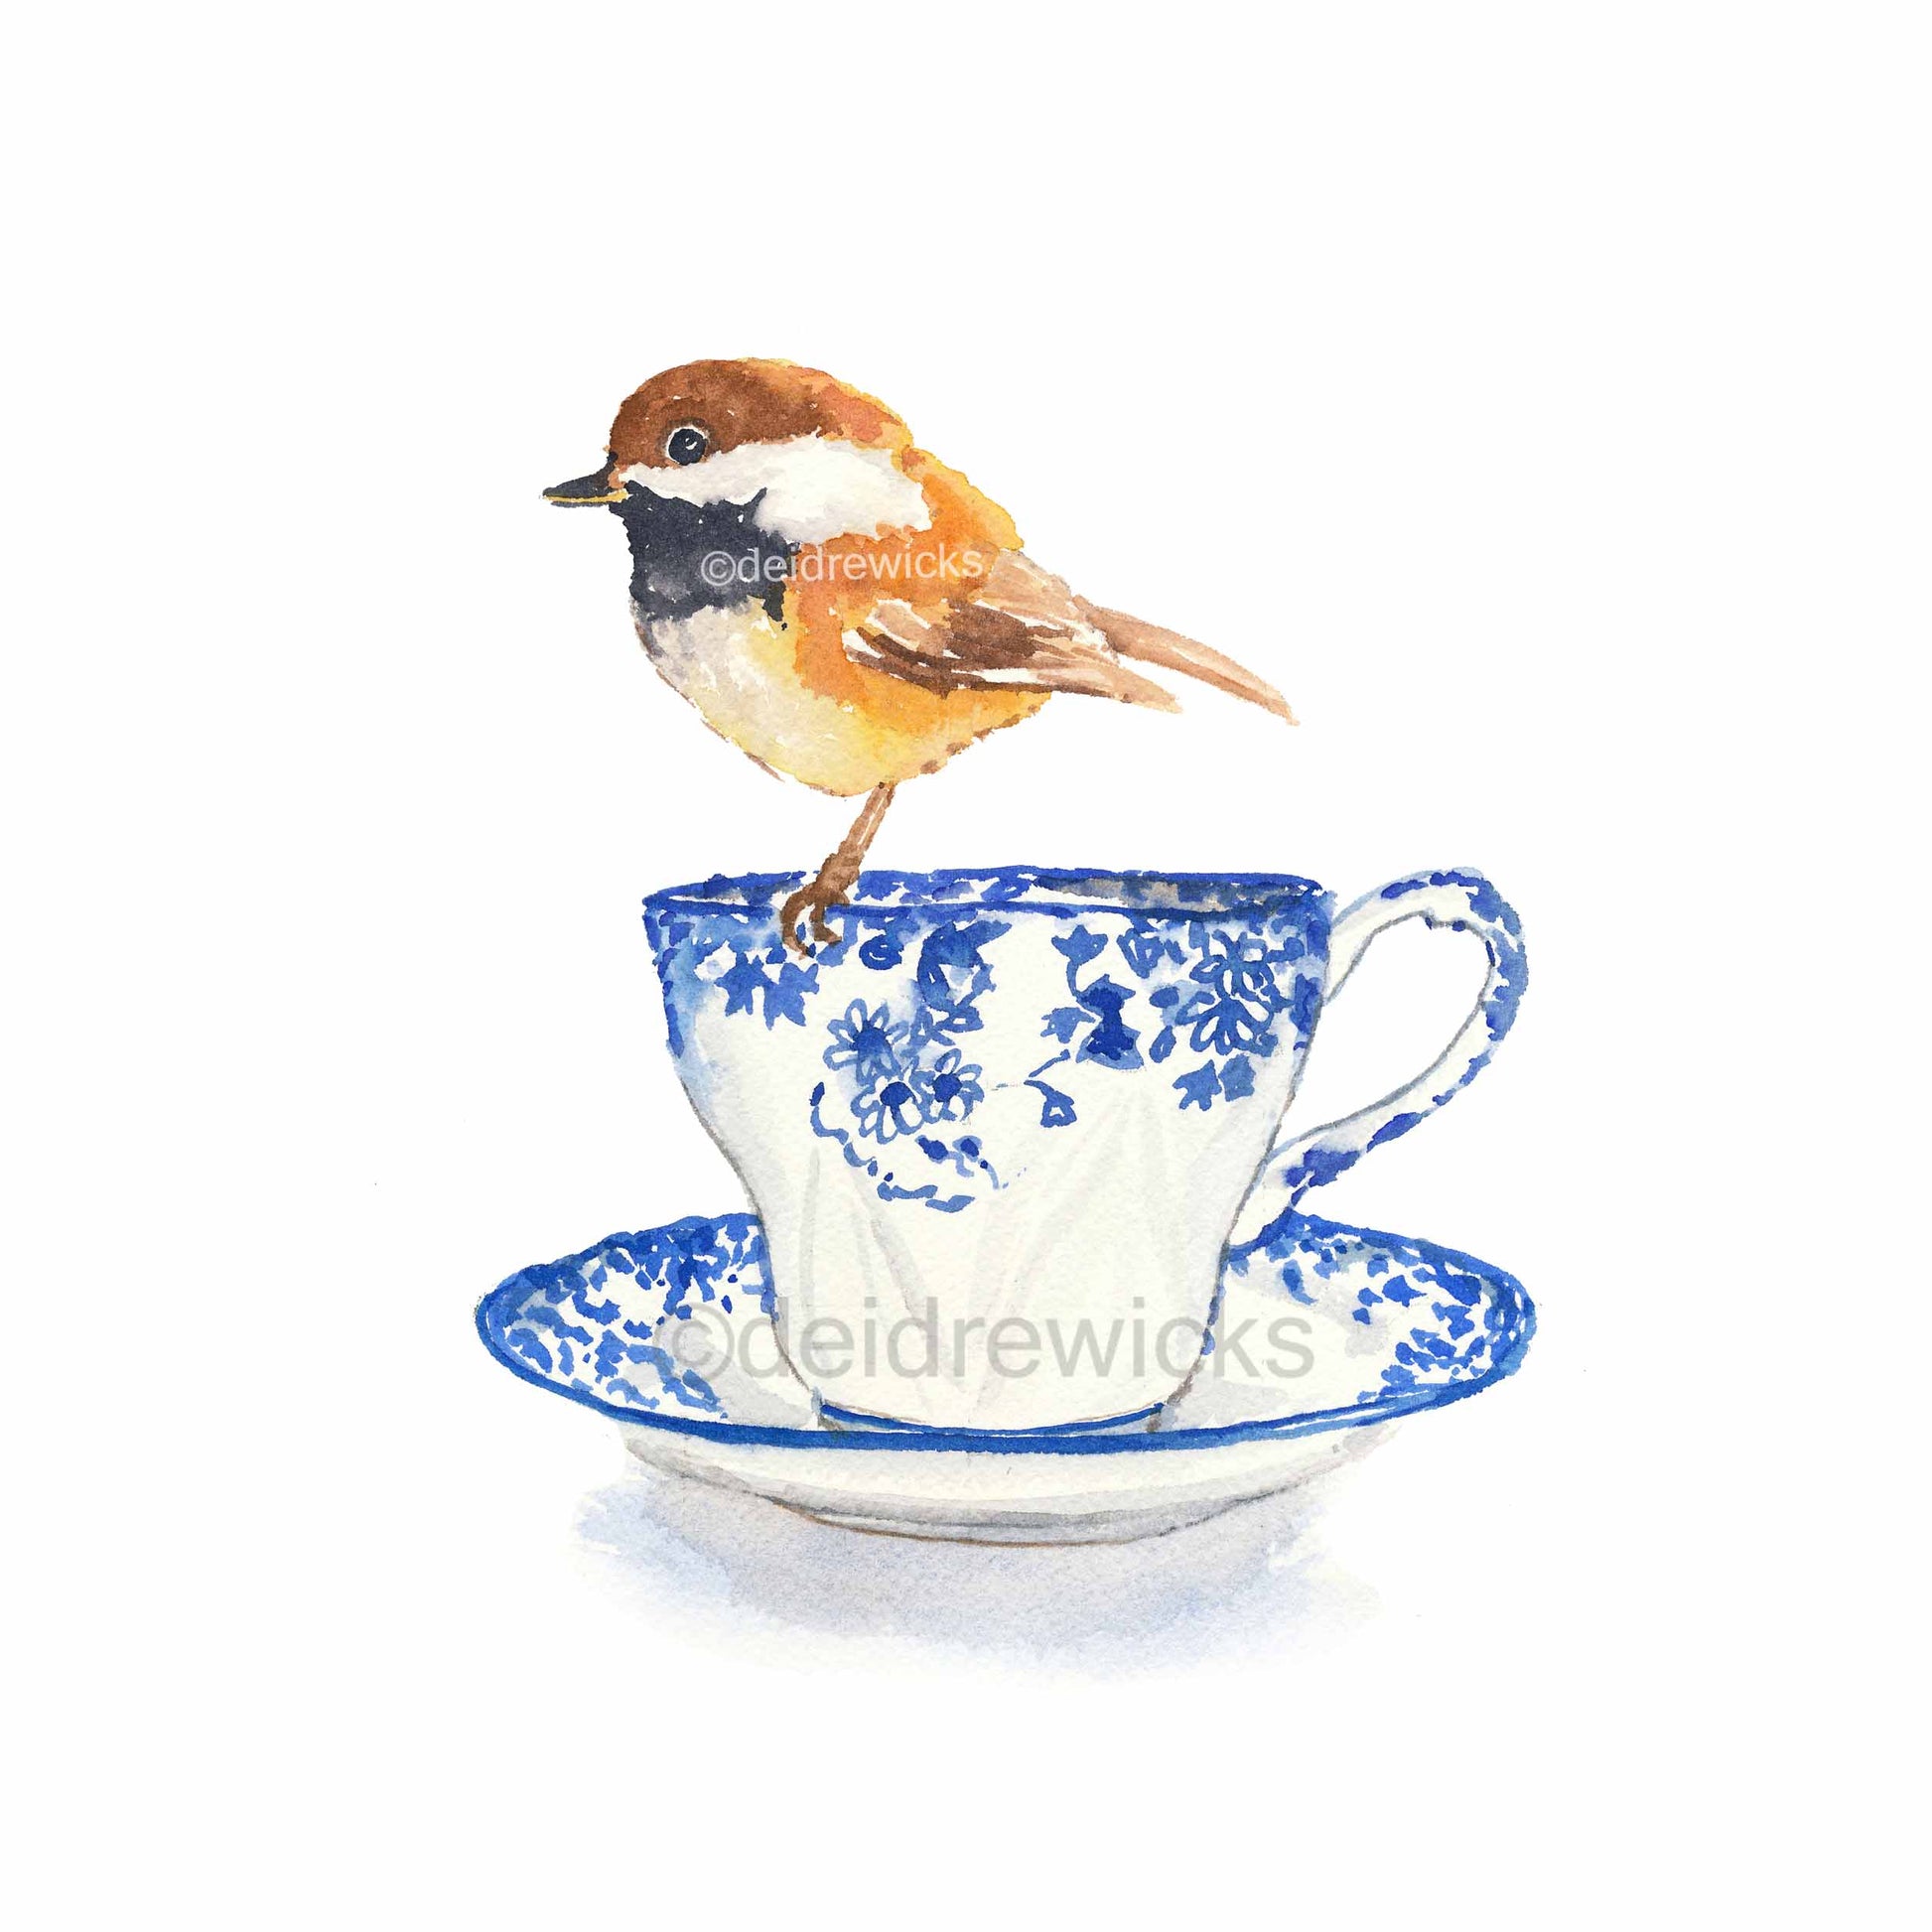 Watercolour painting of a chickadee bird perched on a tea cup